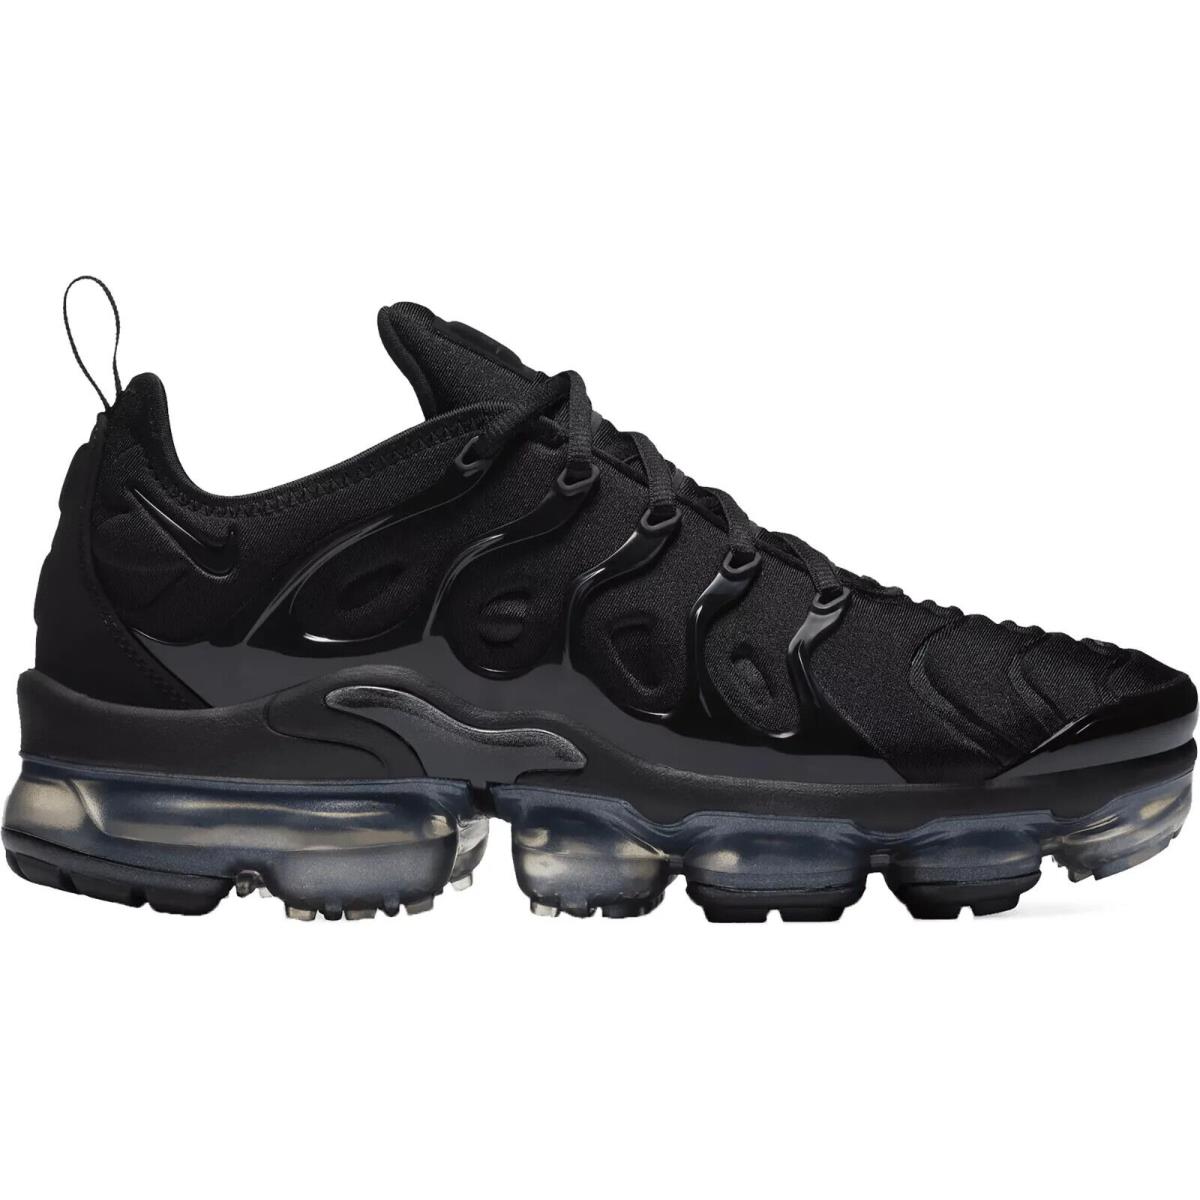 Nike Air Vapormax Plus Women`s Running Shoes All Colors US Sizes 6-11 Black/Anthracite/Black